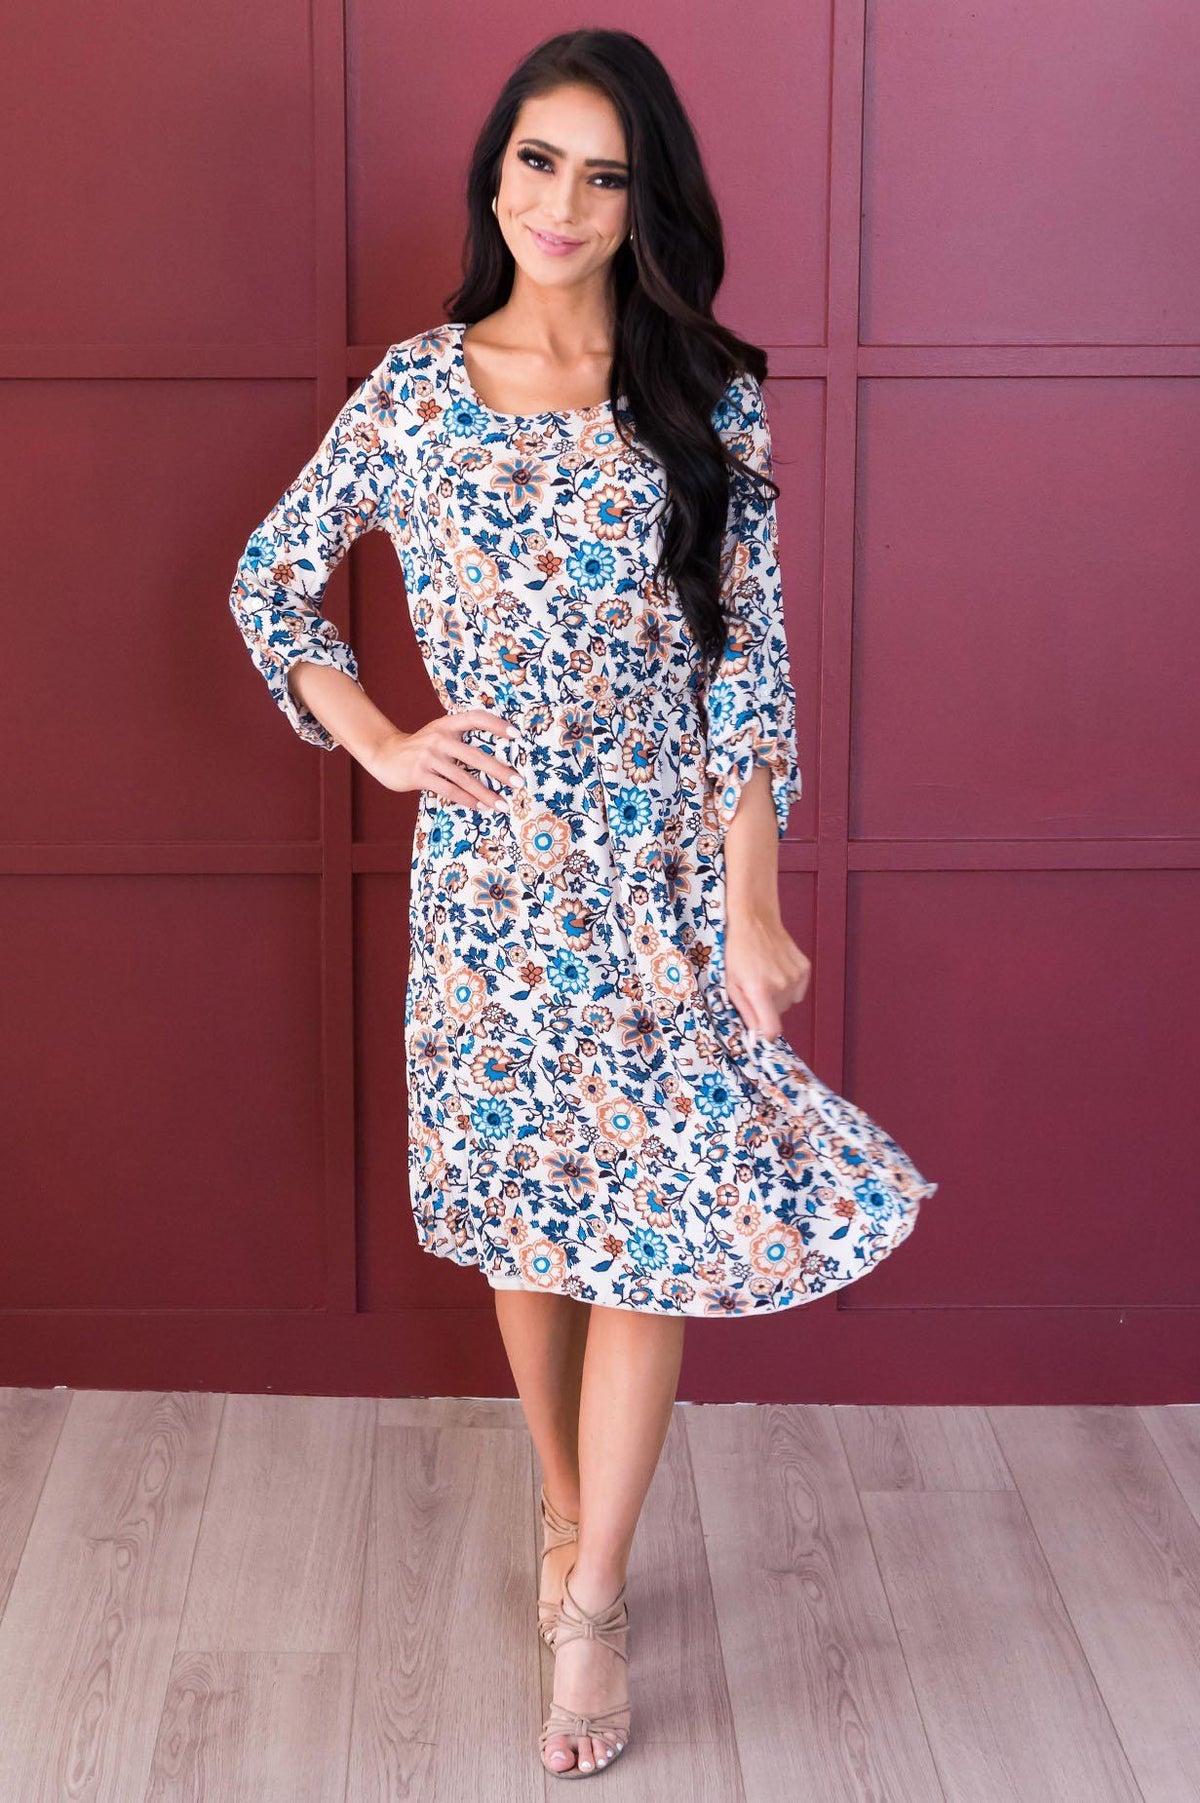 Peachy Cream Floral Modest Dress | Best and Affordable Modest Boutique ...